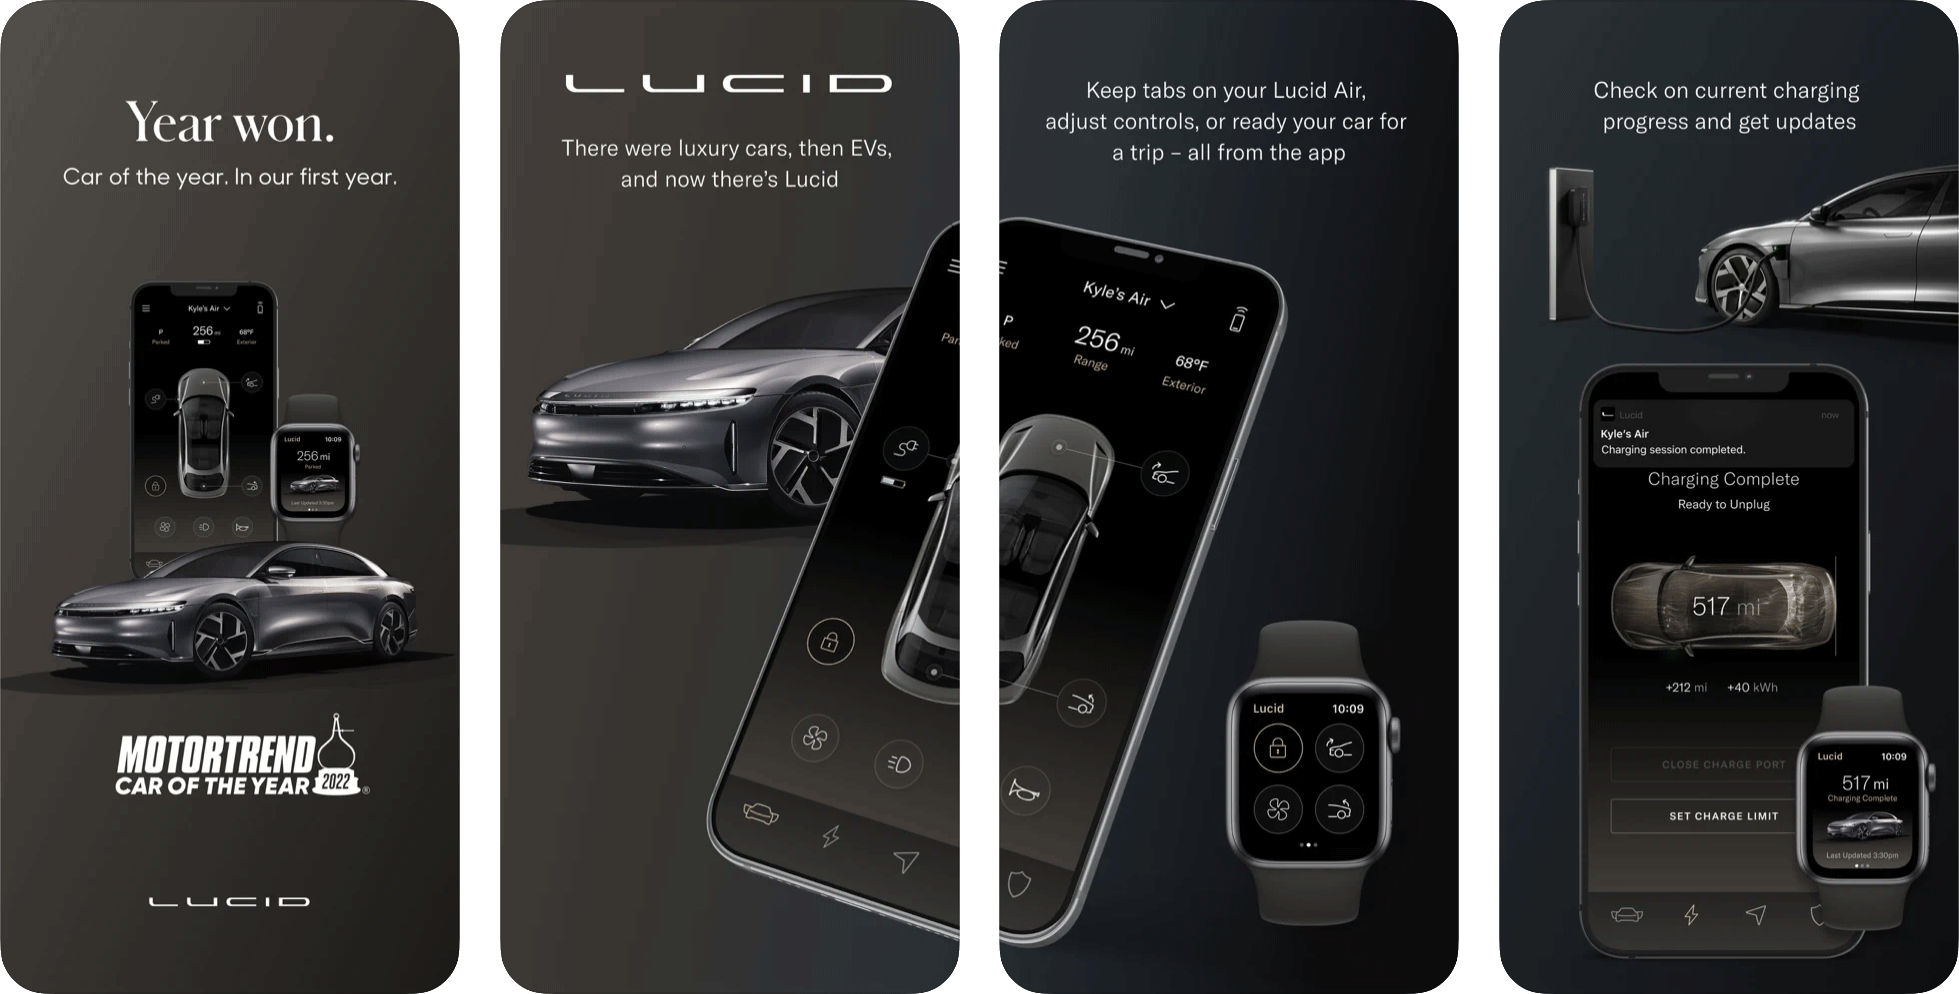 Lucid Mobile App For iOS Updated Today v.1.13.1